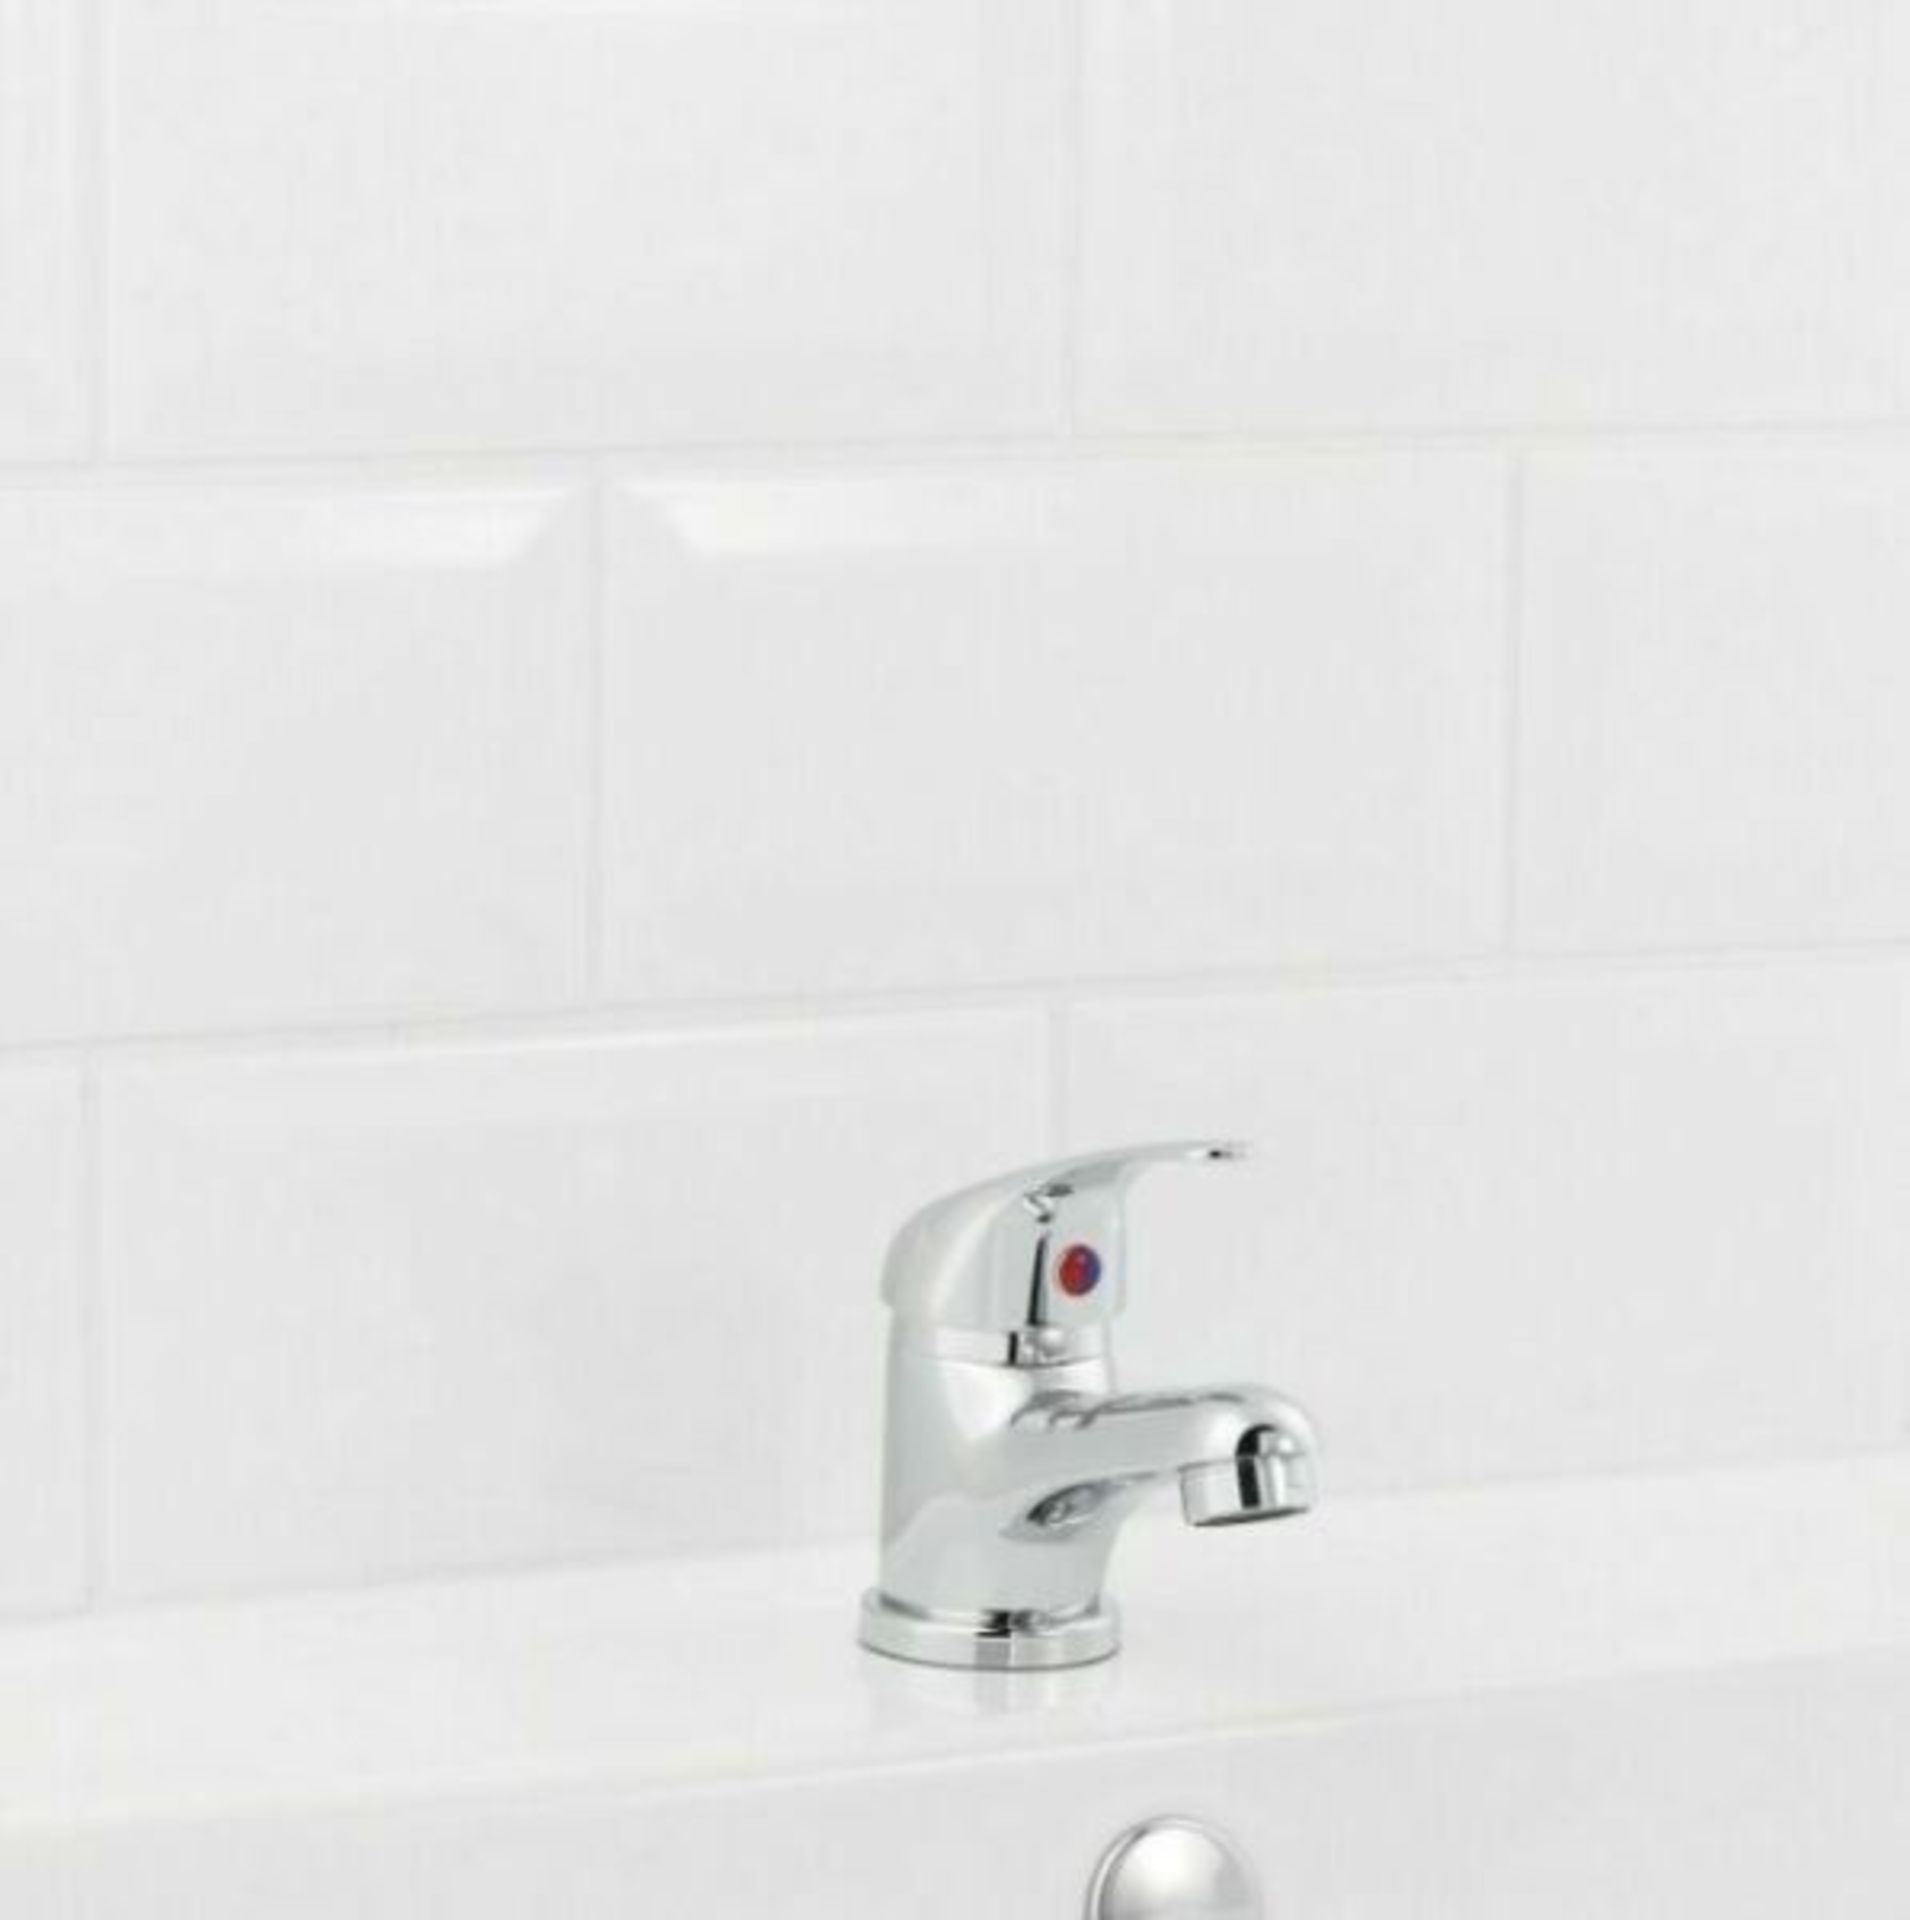 NEW (REF249) Arborg 1 lever Chrome effect Contemporary Basin Mixer Tap. This traditional style ...